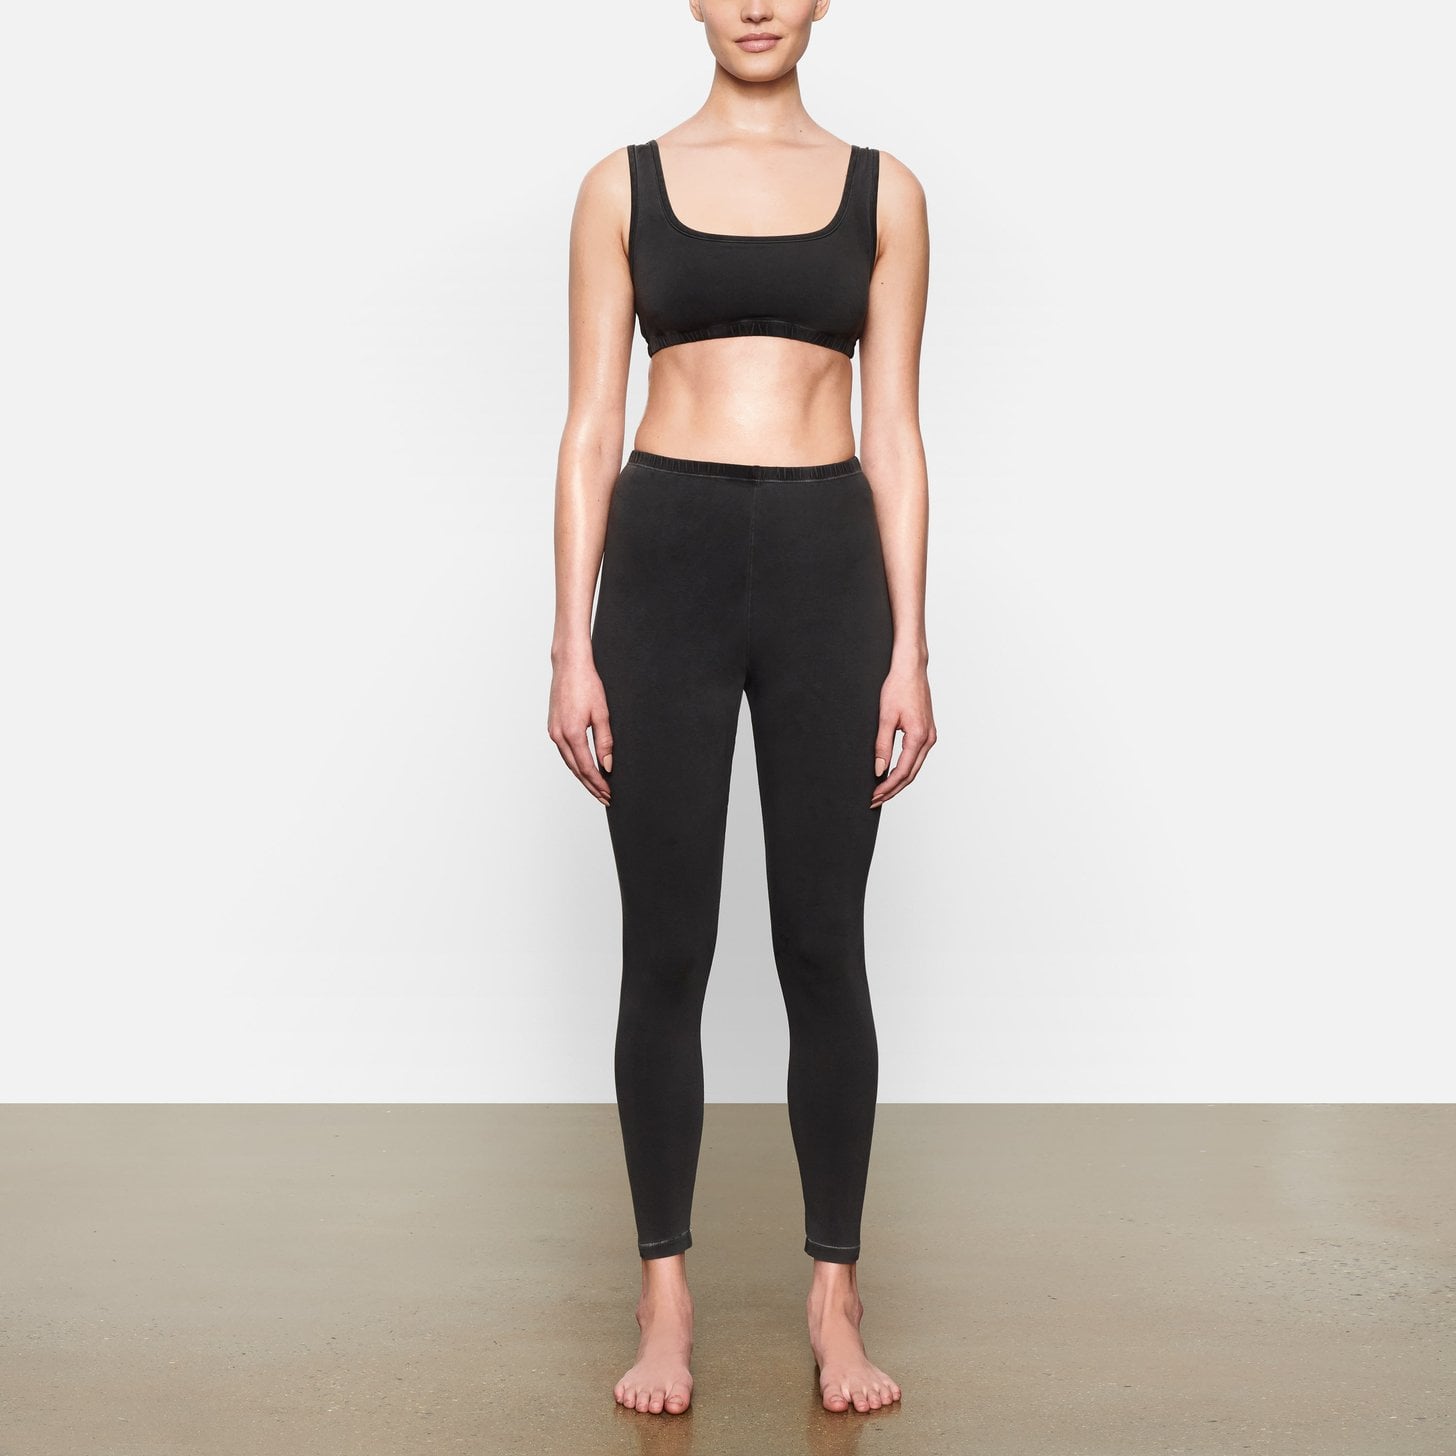 Skims Outdoor Basics Leggings and Wide Neck Bralette, Skims's First  Outdoor Collection Is Meant to Take You Everywhere You Want to Go